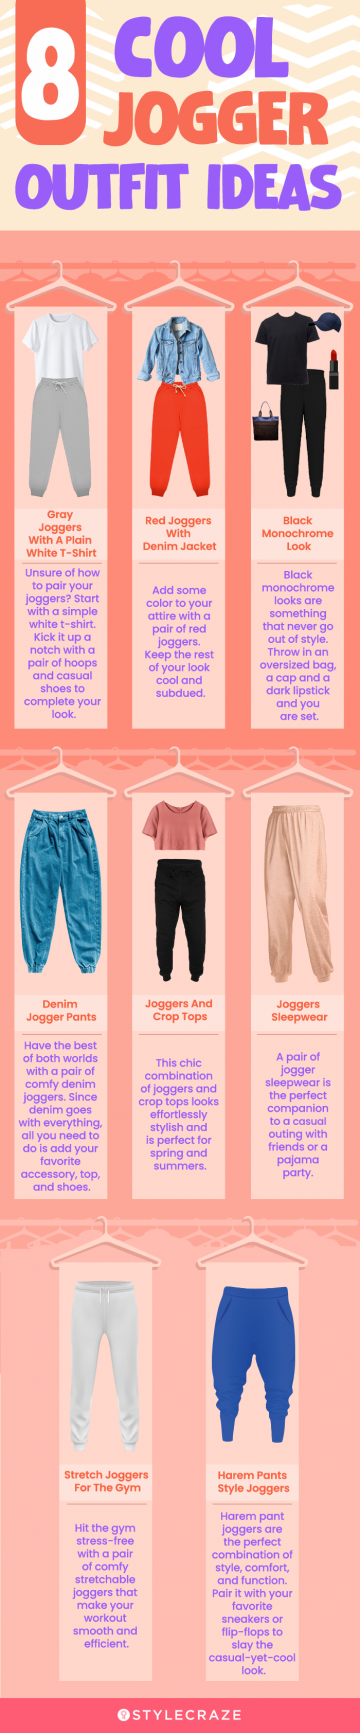 8 cool jogger outfit ideas (infographic)